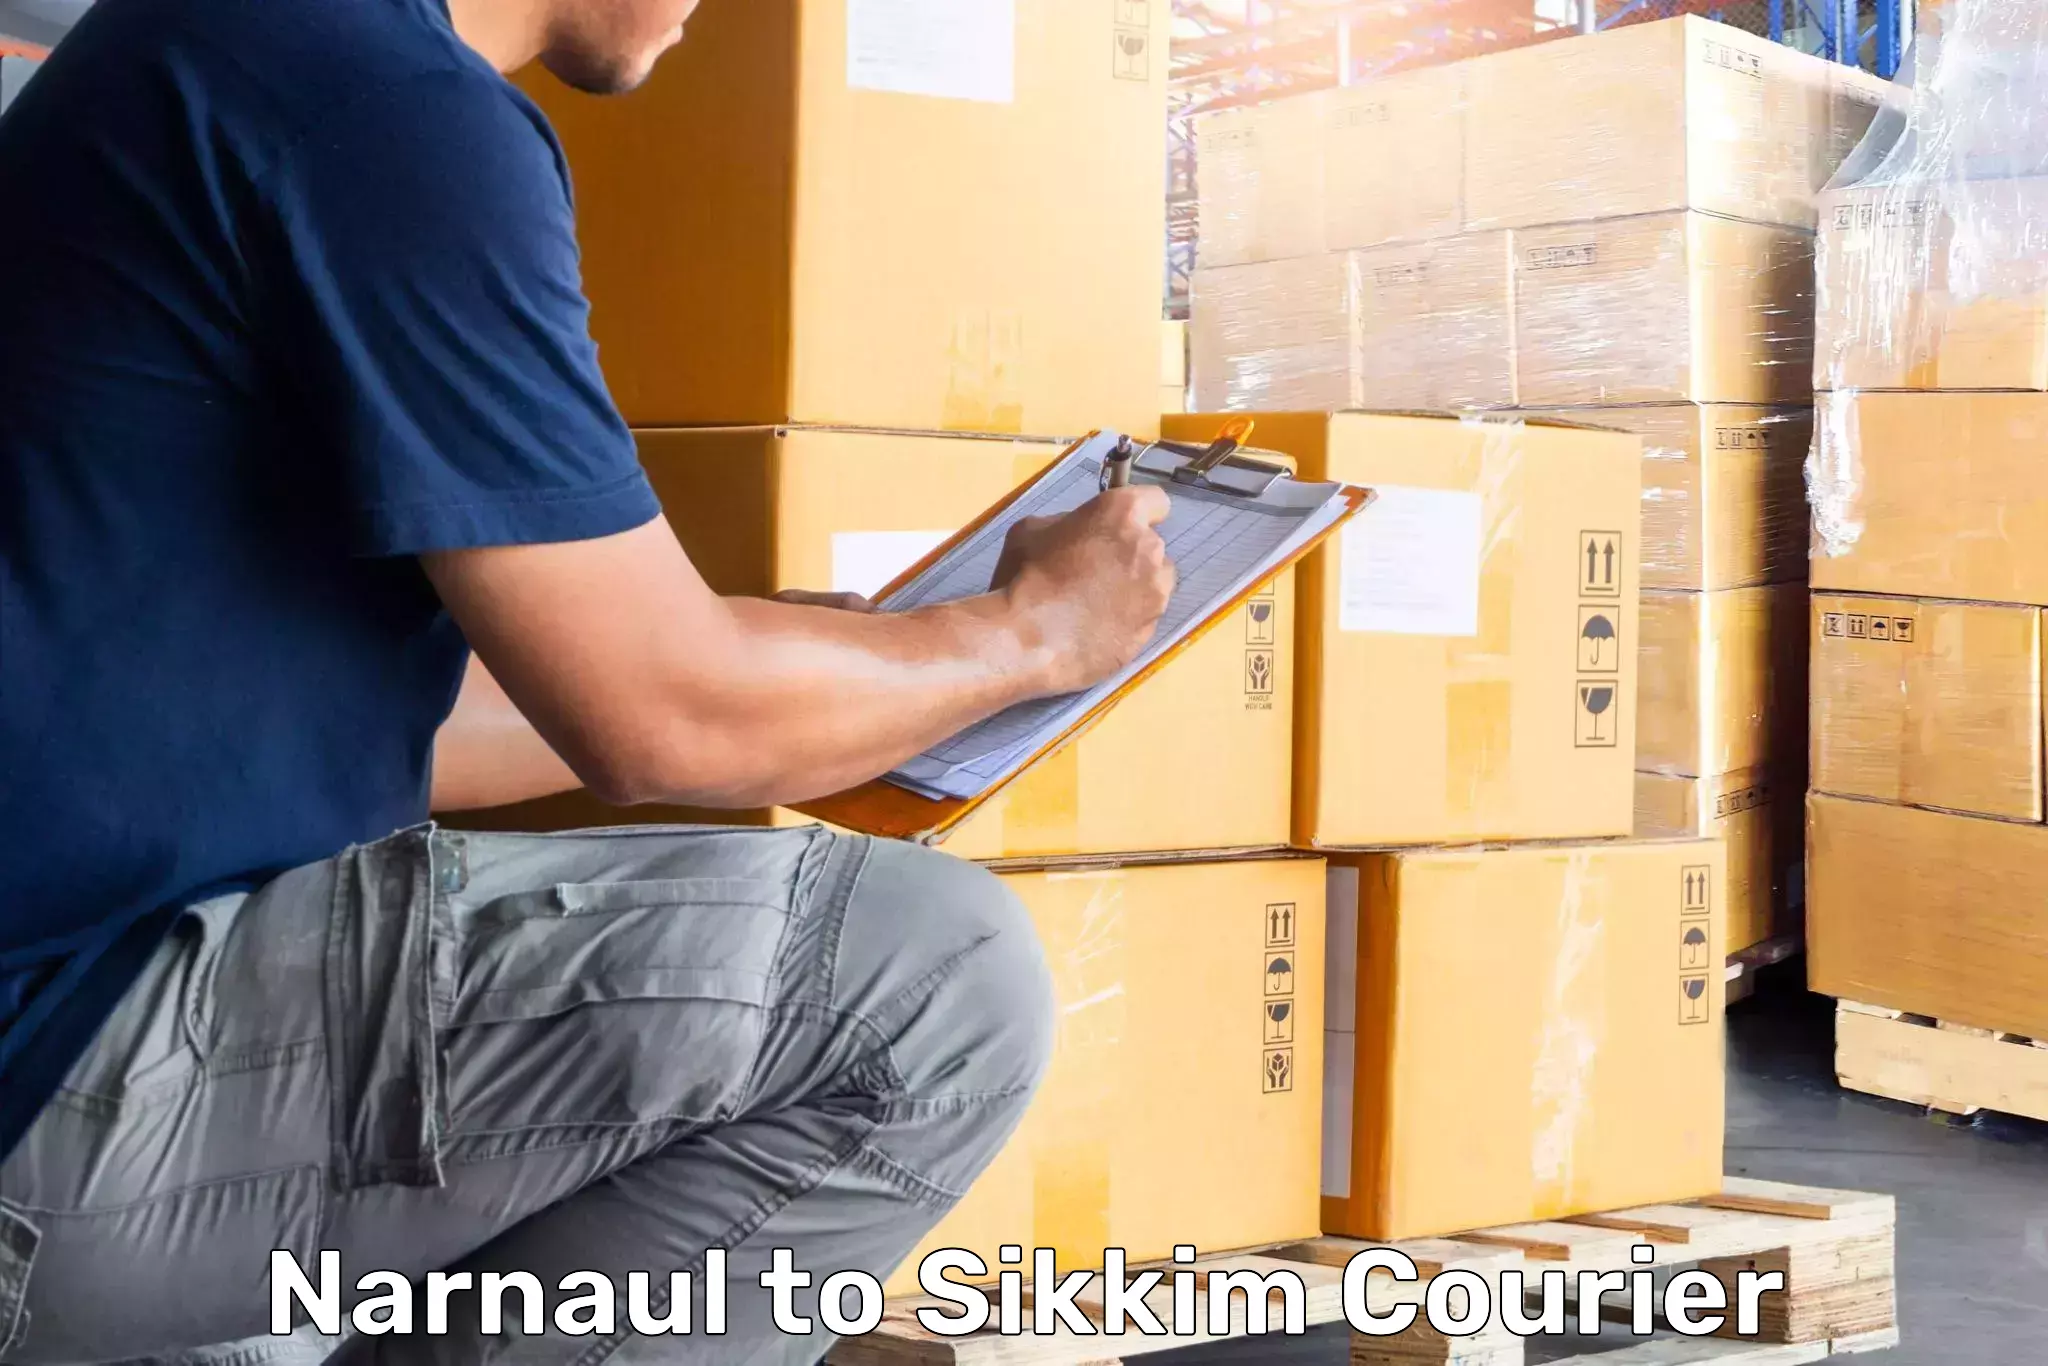 Luggage transfer service Narnaul to Sikkim